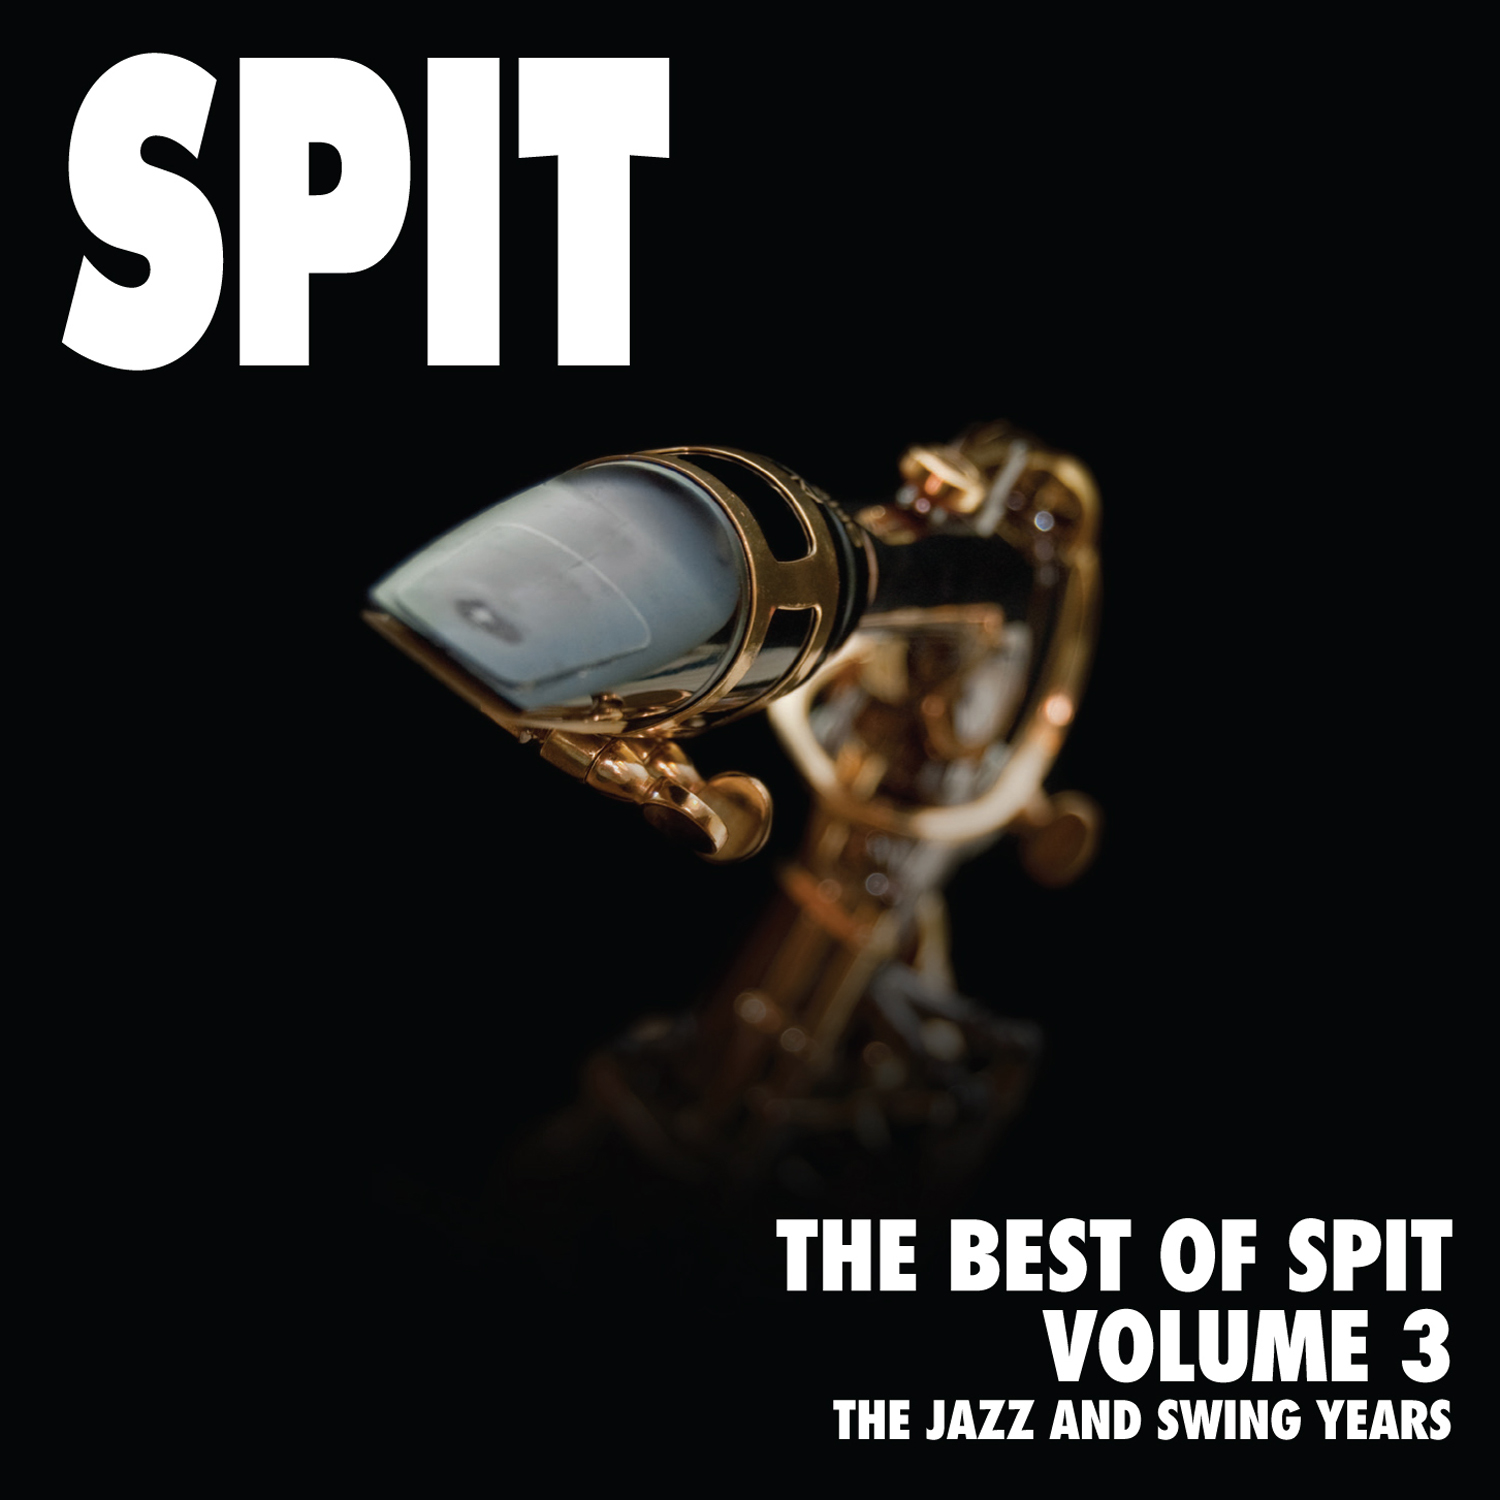 The Best of Spit: Vol 3, The Jazz and Swing Years